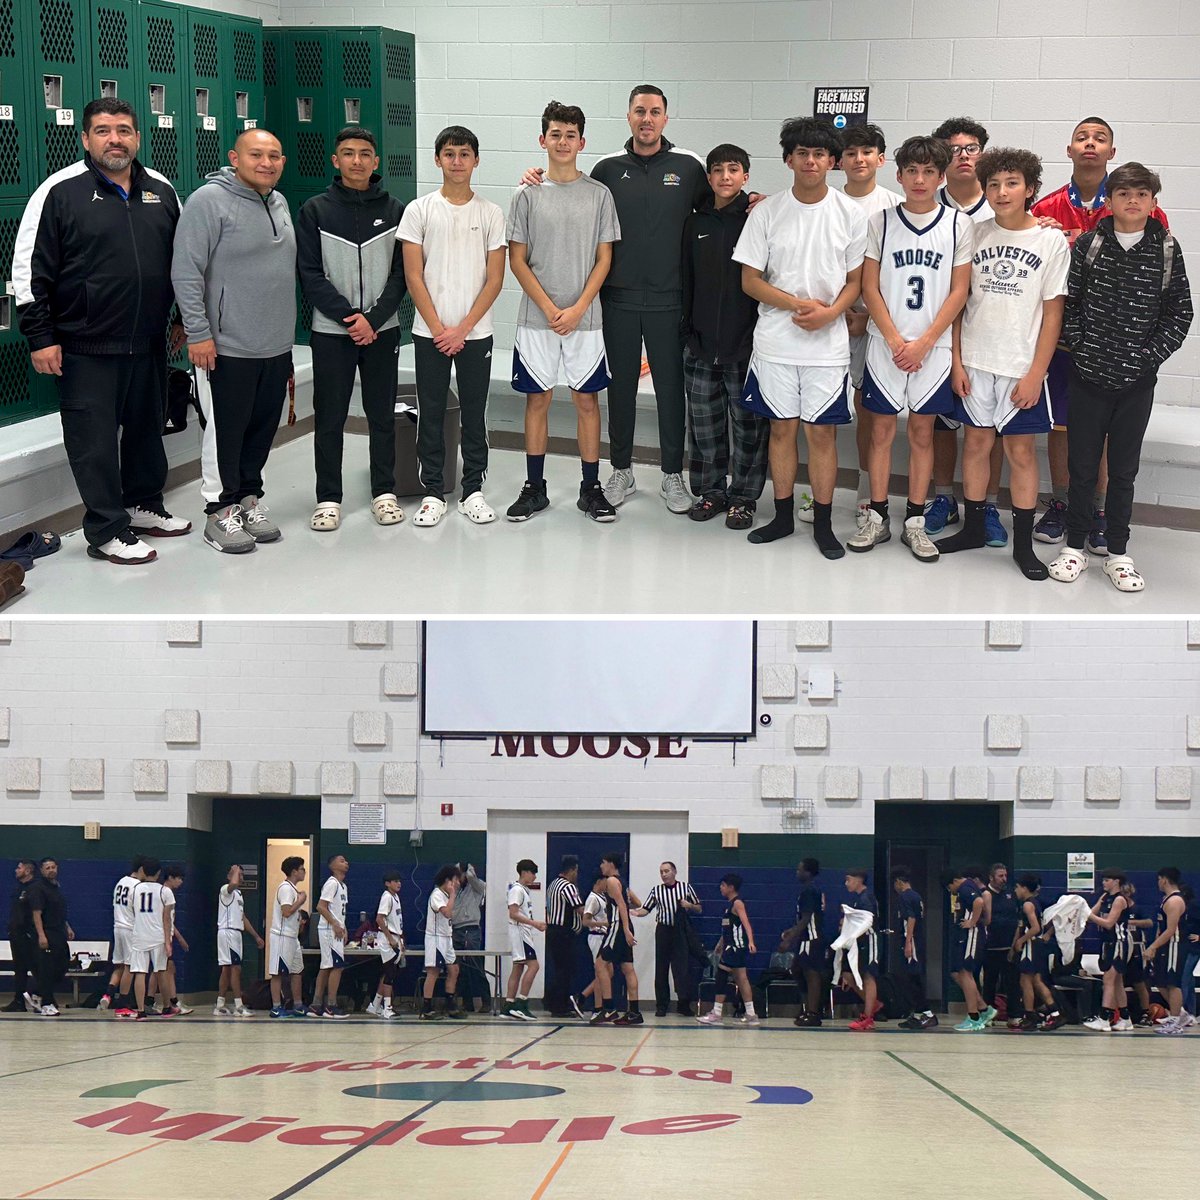 Had a great time seeing the @Montwood_MS Hoop Squad play tonight ! #FutureRams🐏 #MooseHoops🦌 #MontwoodHoops🏀